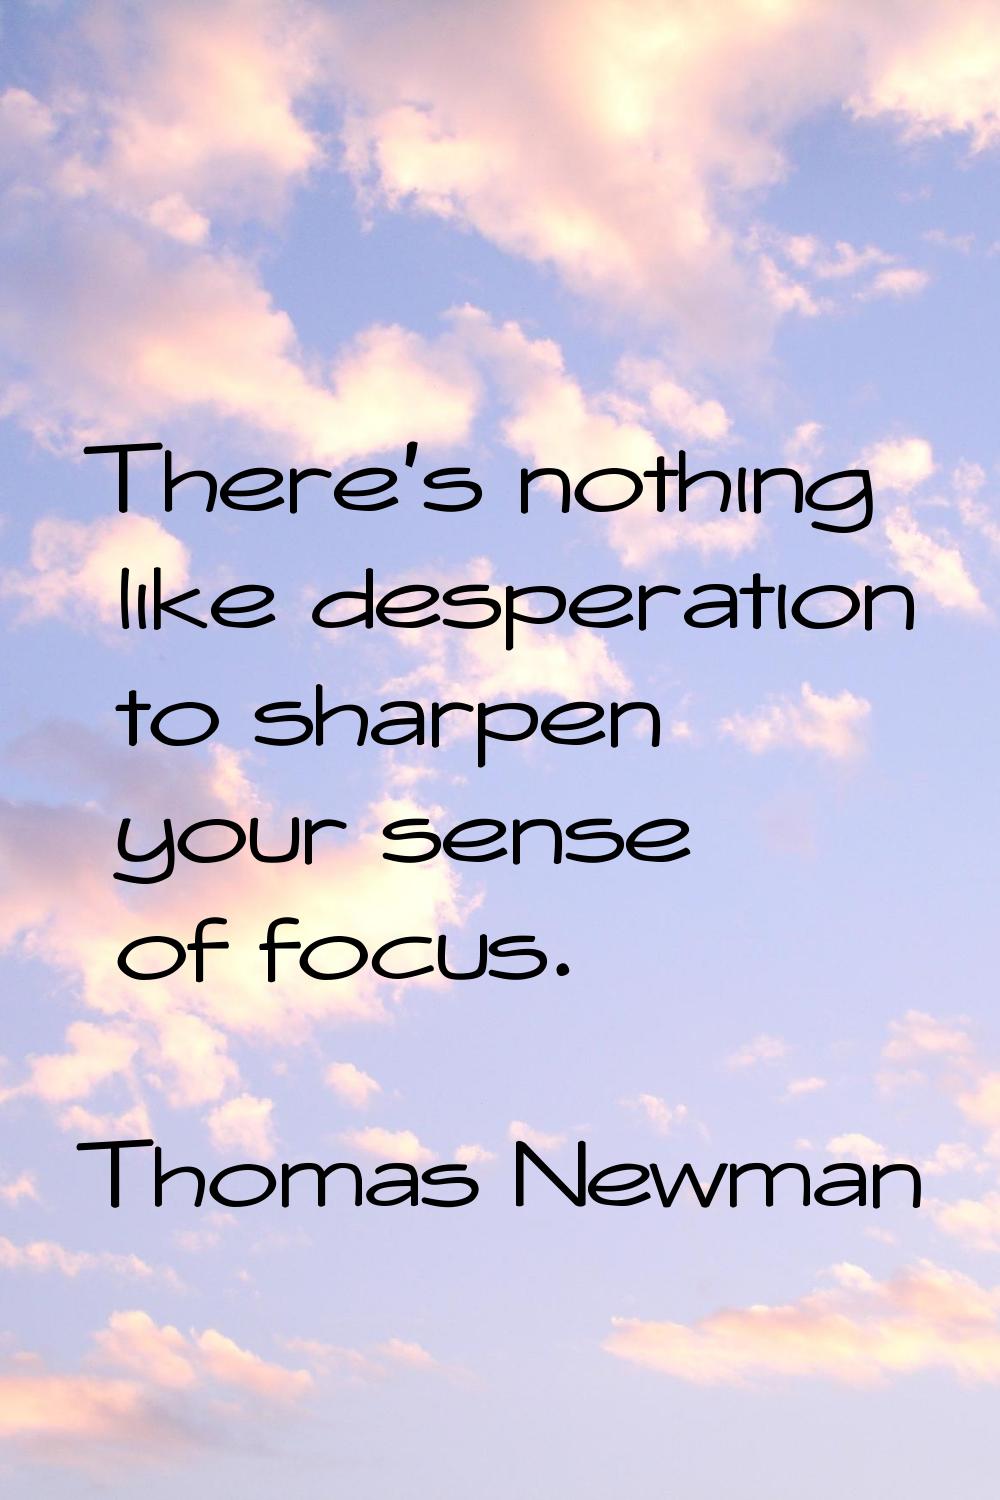 There's nothing like desperation to sharpen your sense of focus.